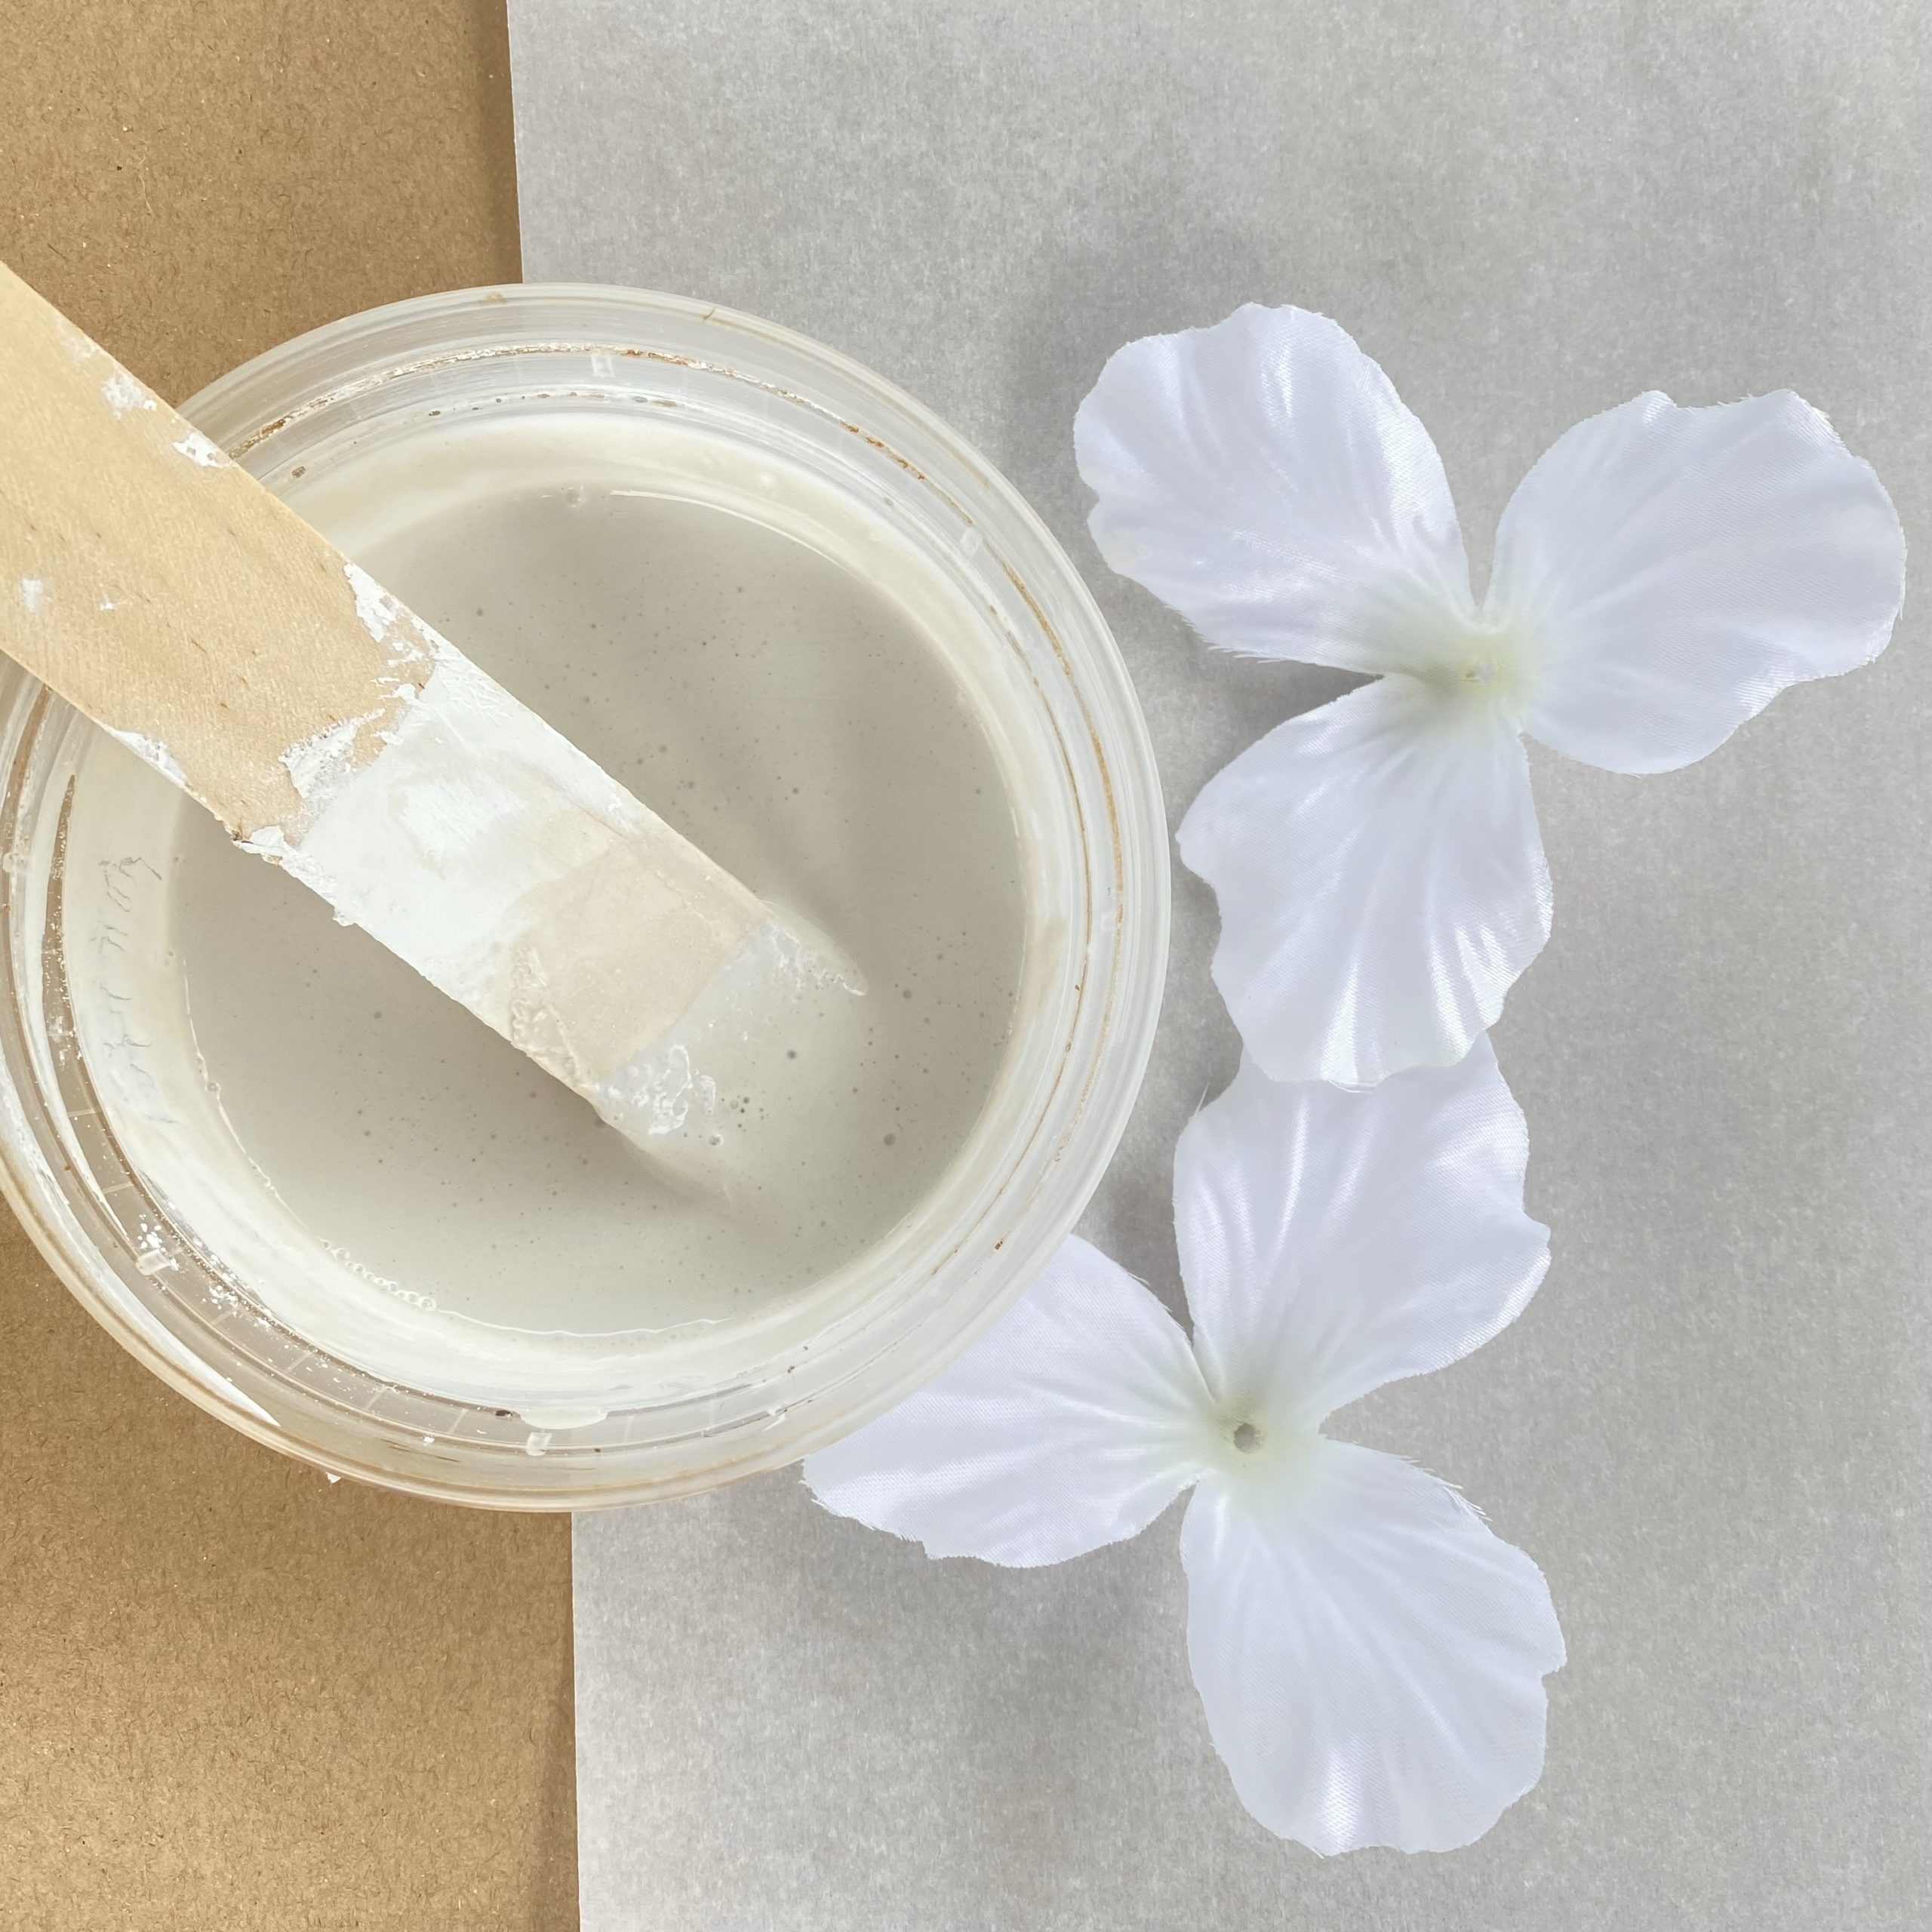 Plaster of paris in a small container with a stir stick. Next to the plaster are the petals from a white faux gladiolus flower.